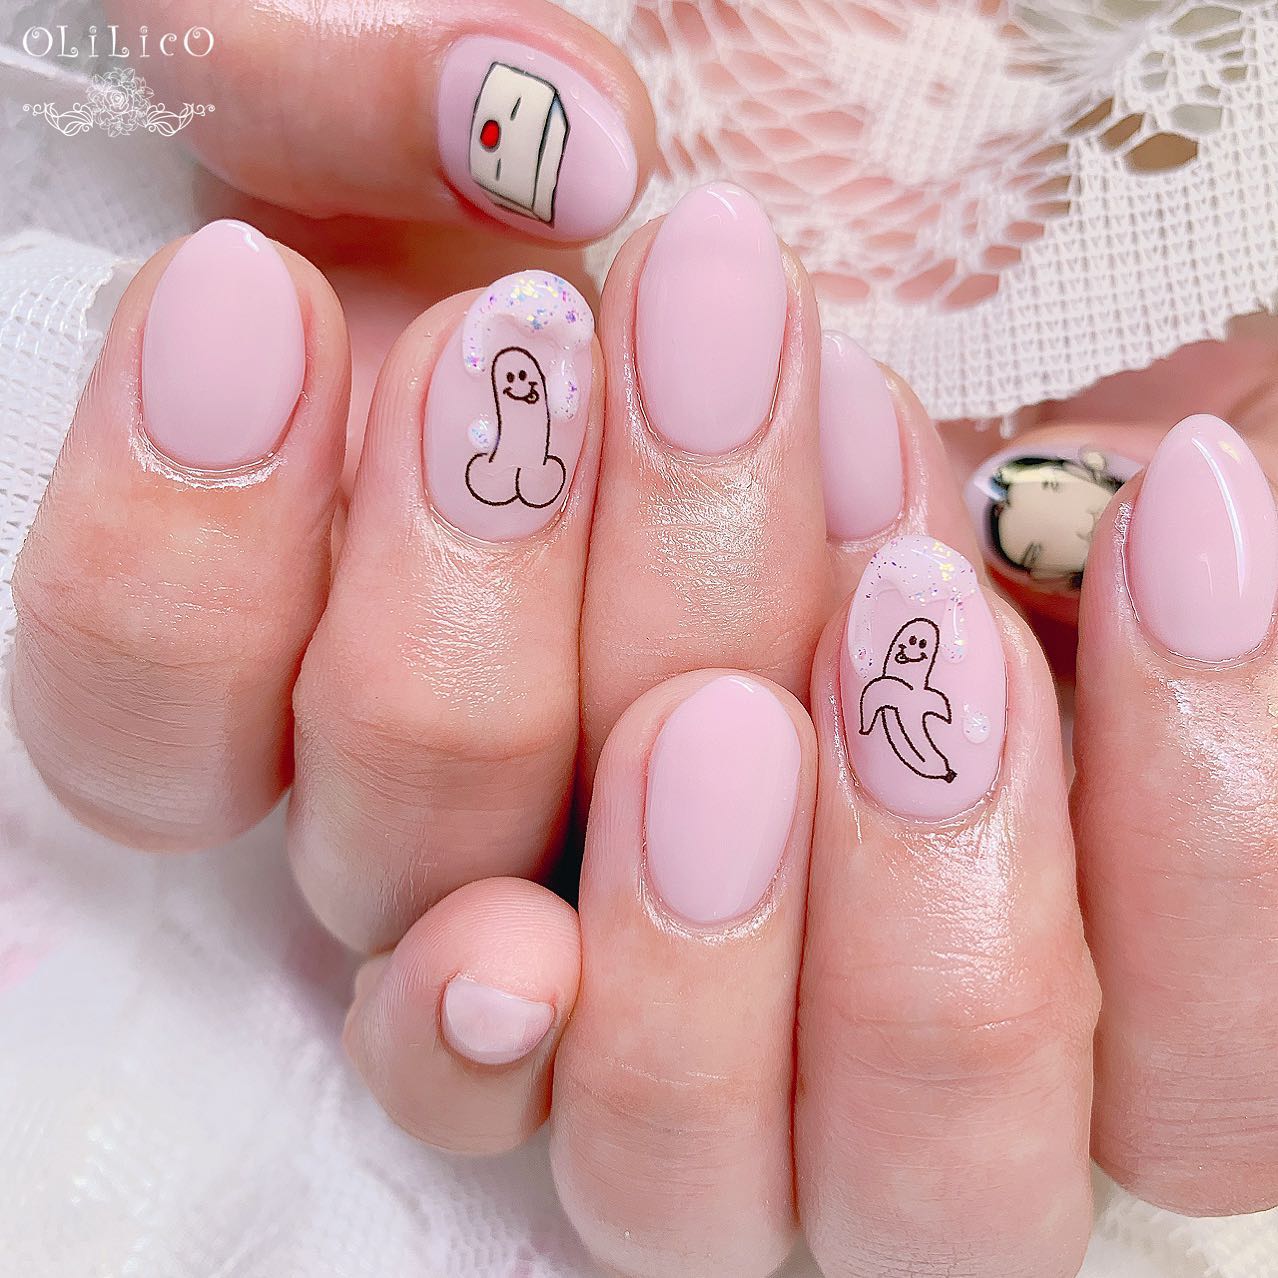 Cute little bananas on nude nails look nice. Plus, as you see above the penis, there are some glitters that emphasize something.